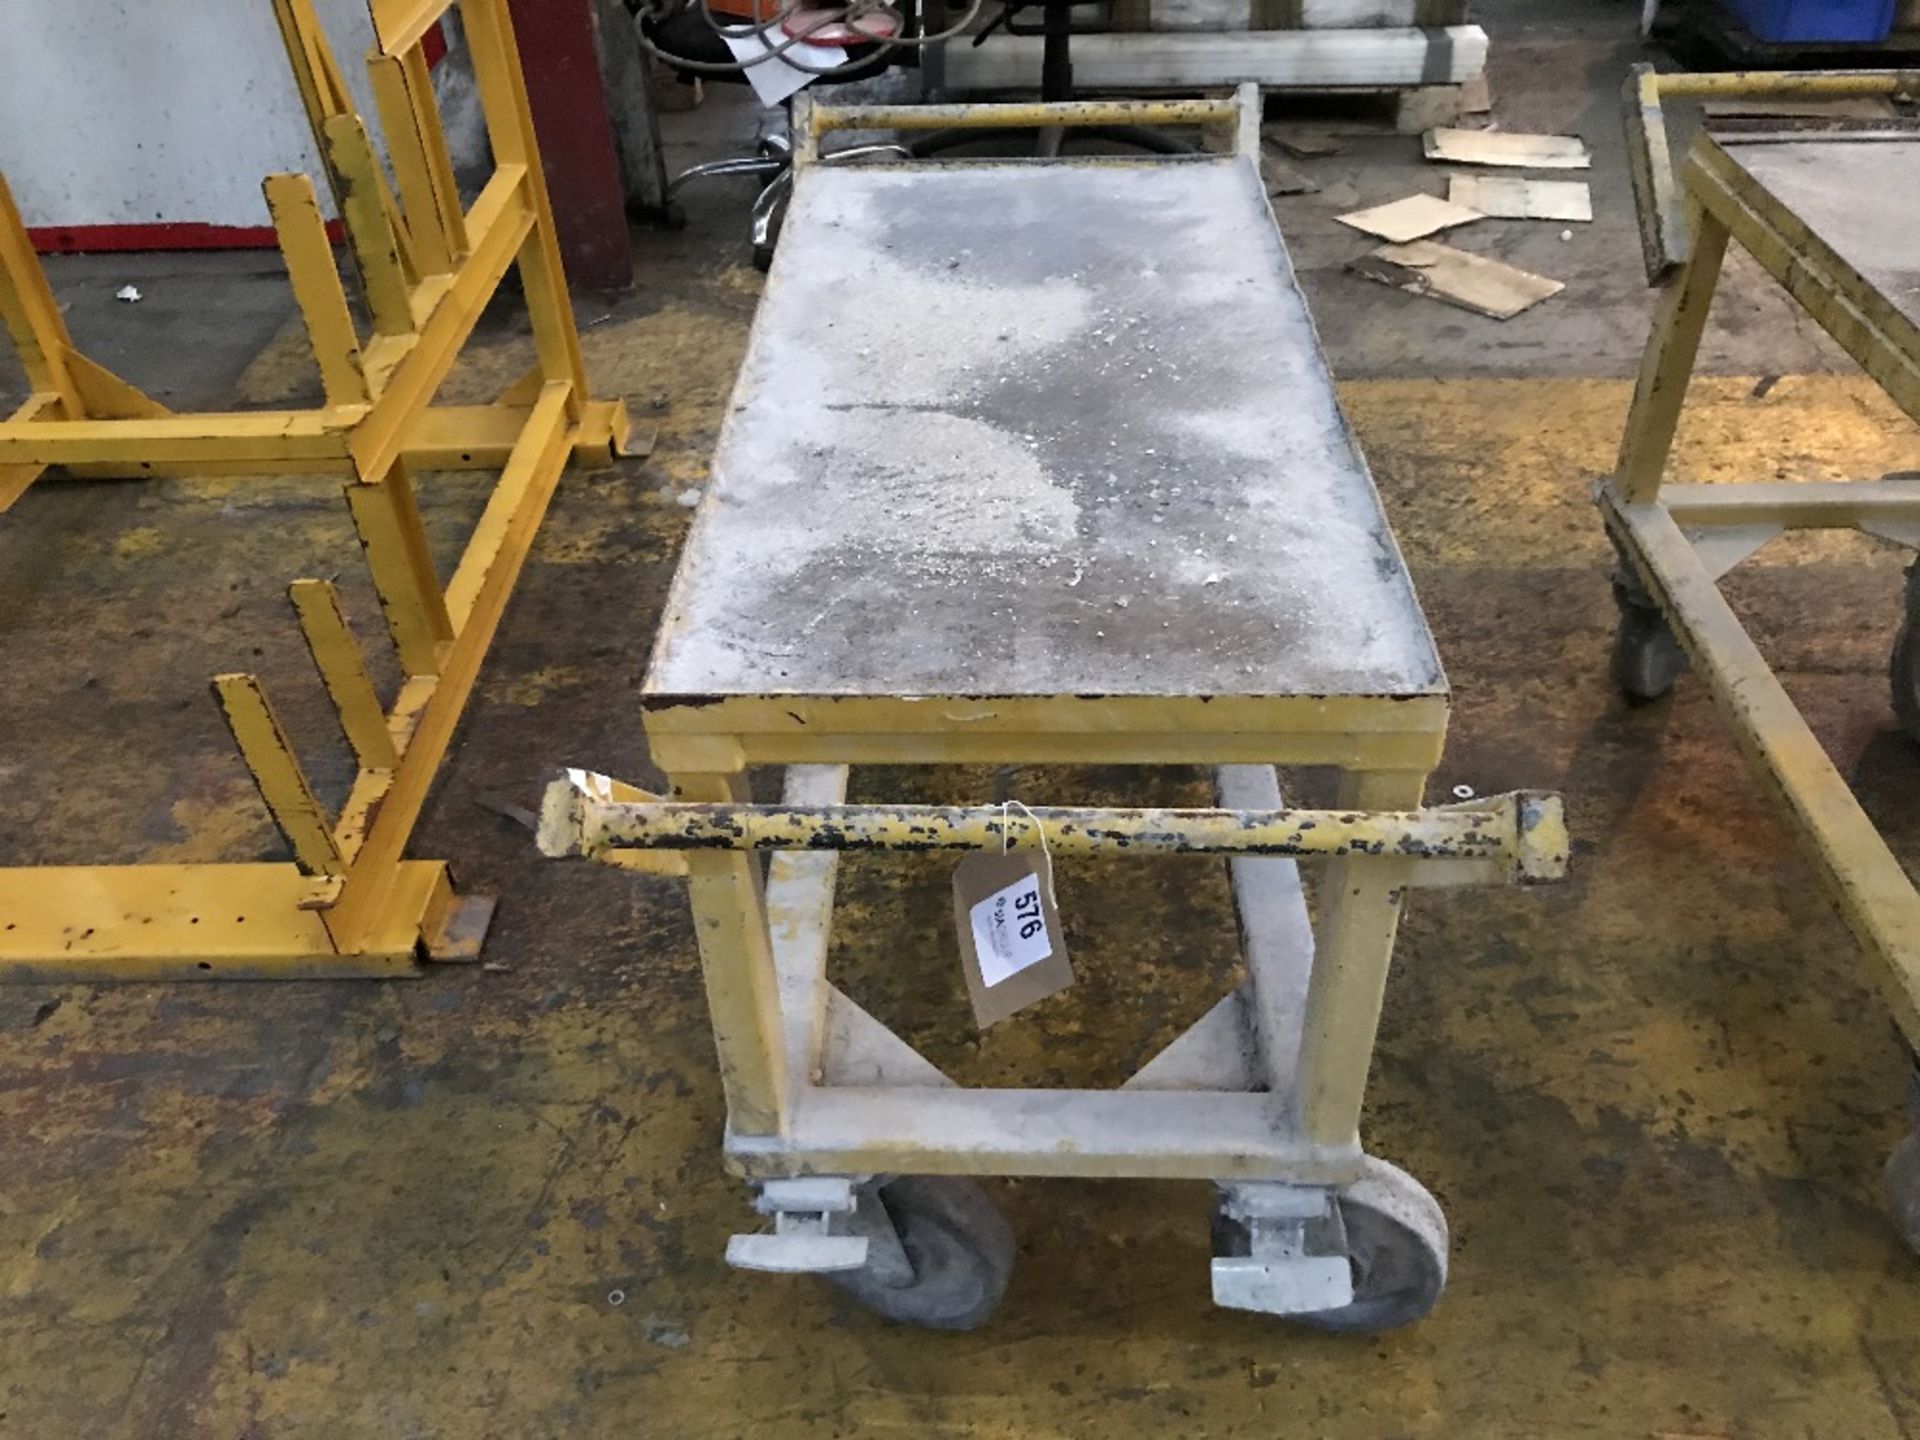 Yellow steel fabricated product trolley on casters